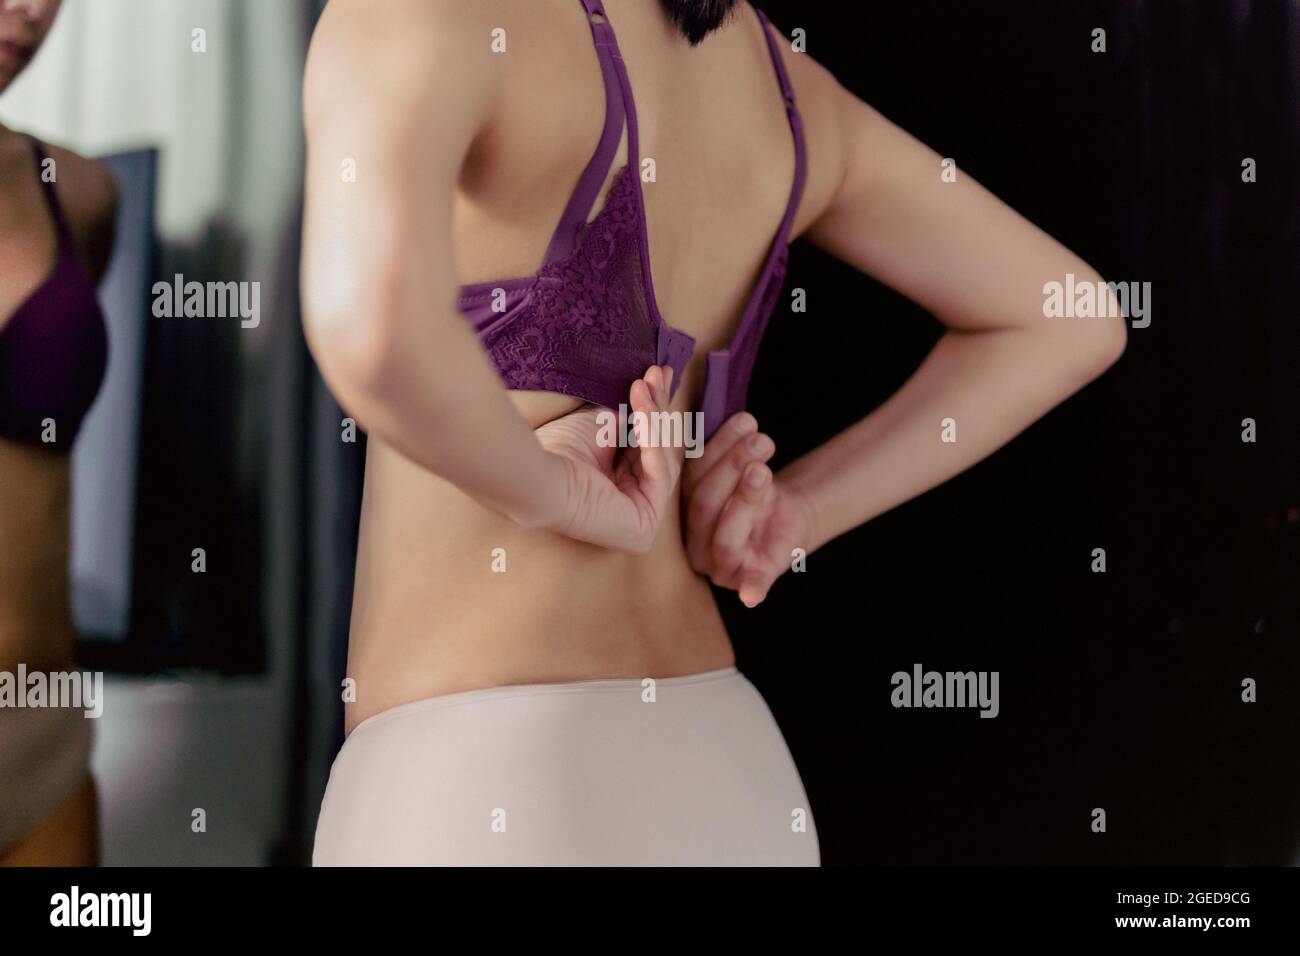 https://c8.alamy.com/comp/2GED9CG/shot-in-low-light-woman-unhooking-her-bra-and-looking-in-the-mirror-indoors-2GED9CG.jpg